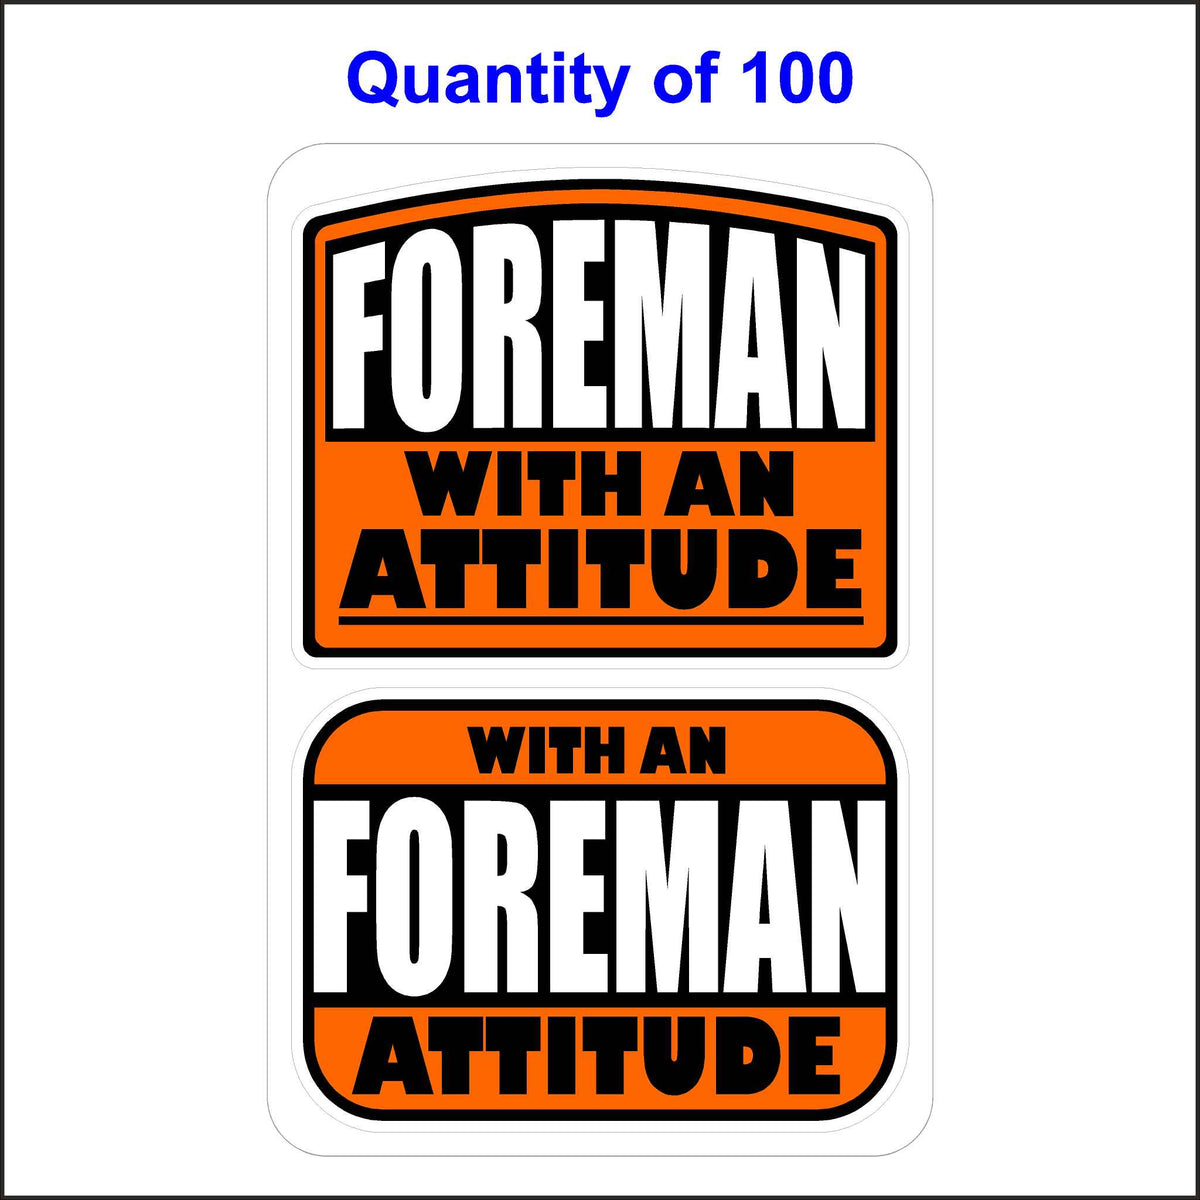 Foreman with an Attitude Stickers 100 Quantity.